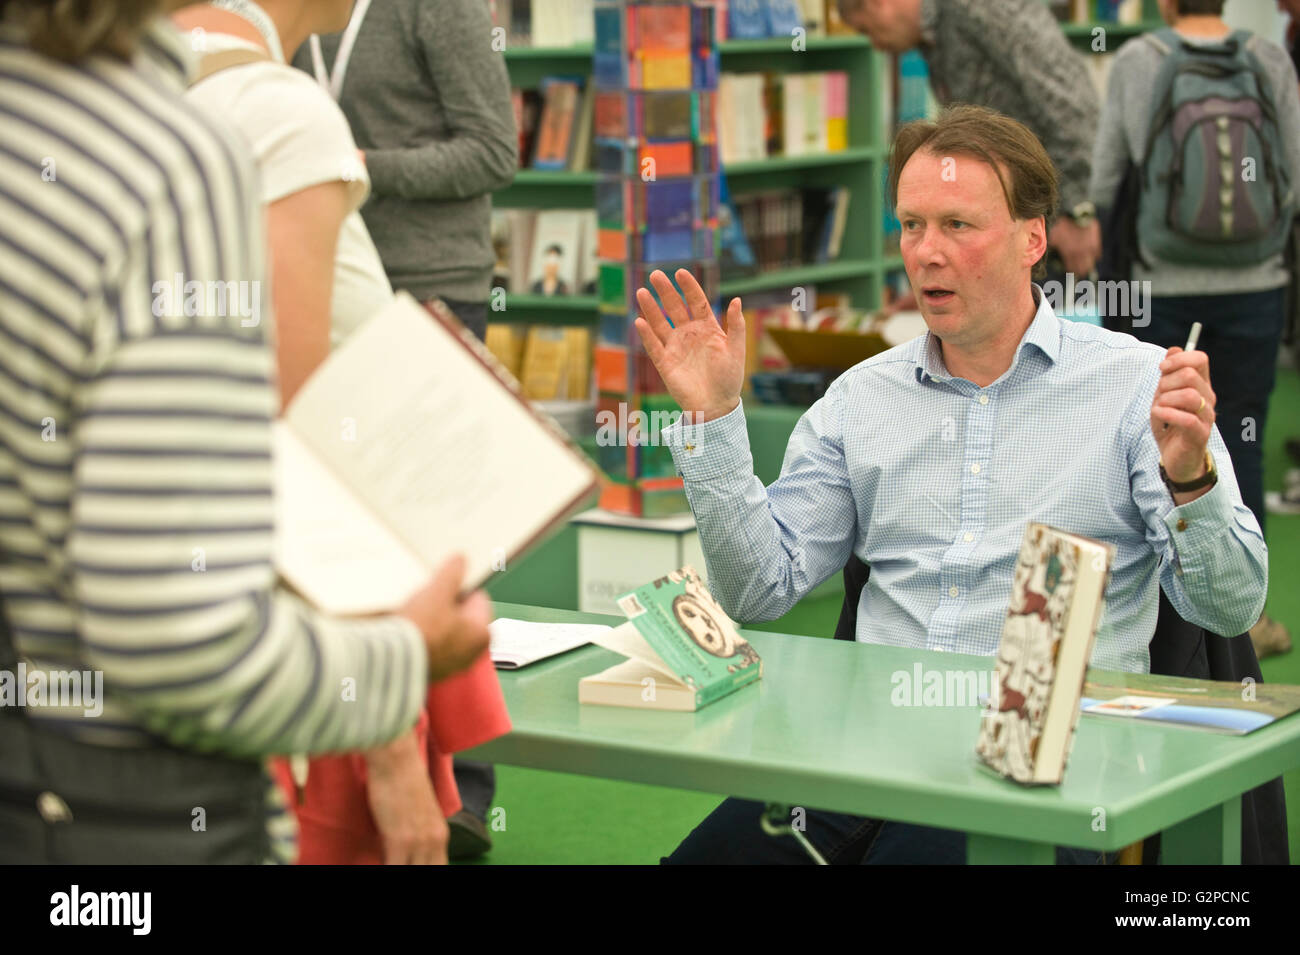 John Lewis-Stempel author book signing in the bookshop at Hay Festival 2016 Stock Photo